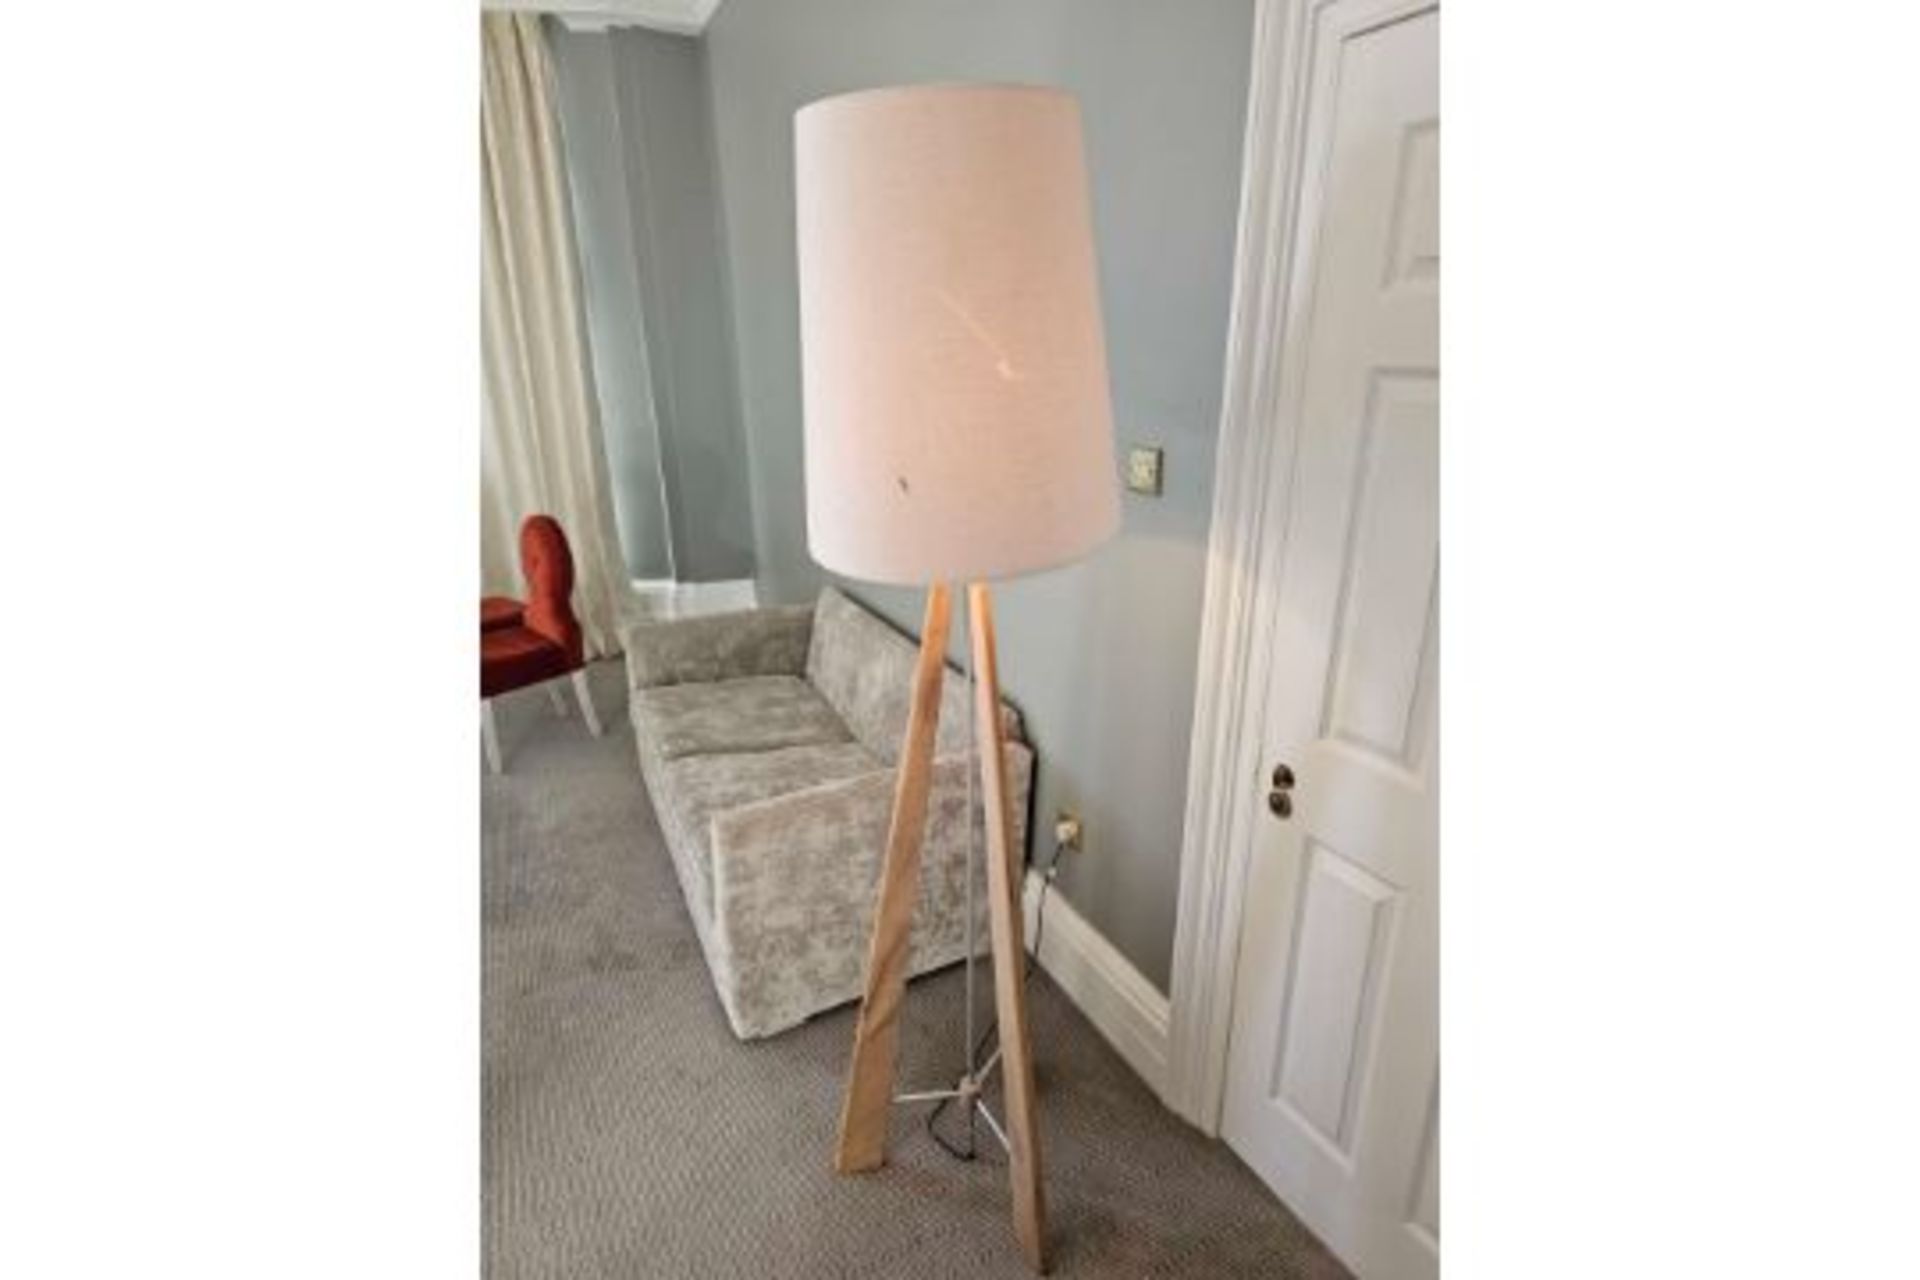 Pavillion Pr Home Tri Floor Lamp The Tri Is A Large Floor Lamp Available In Natural Meh Wood The